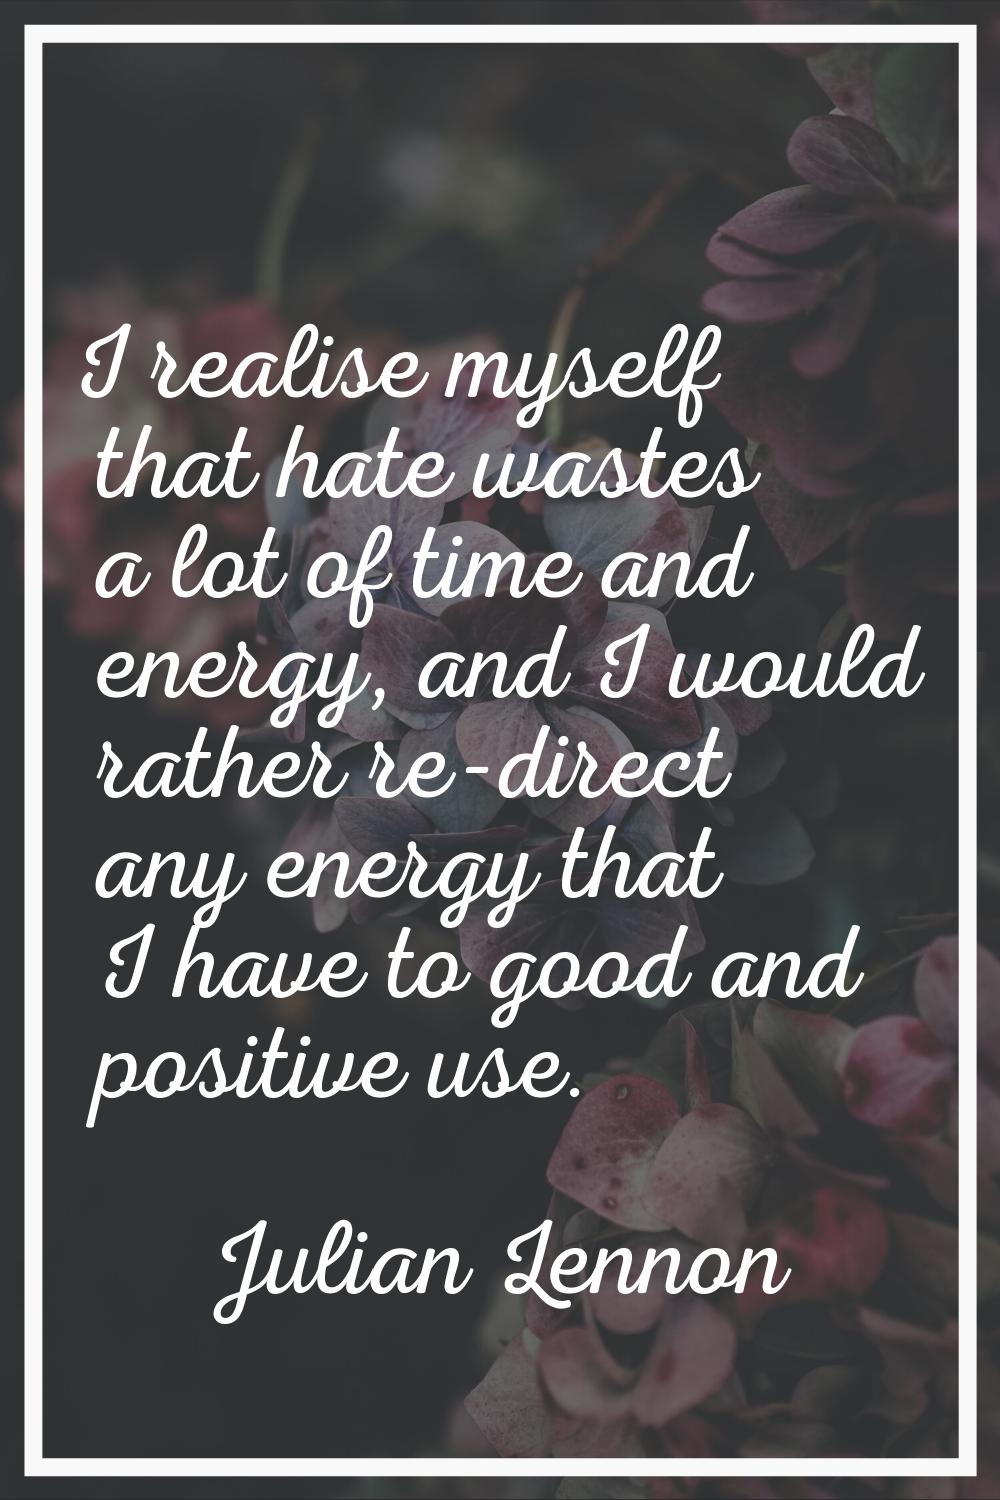 I realise myself that hate wastes a lot of time and energy, and I would rather re-direct any energy